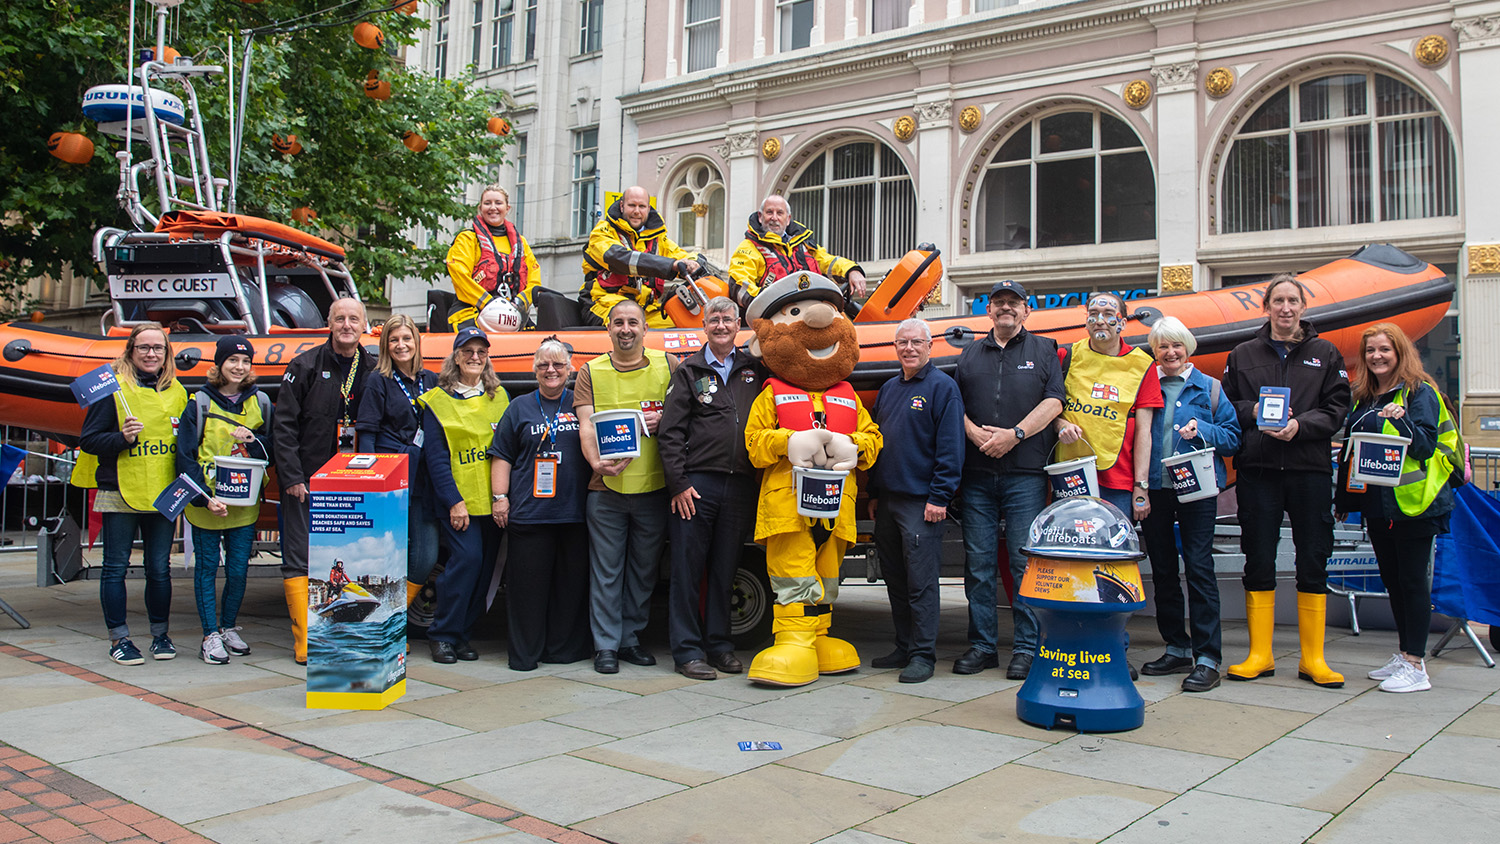 RNLI Lifeboat Saturday first street collection in Manchester in 1891 with crew and fundraisers infront of their lifeboat, and a recreation more than 100 years later